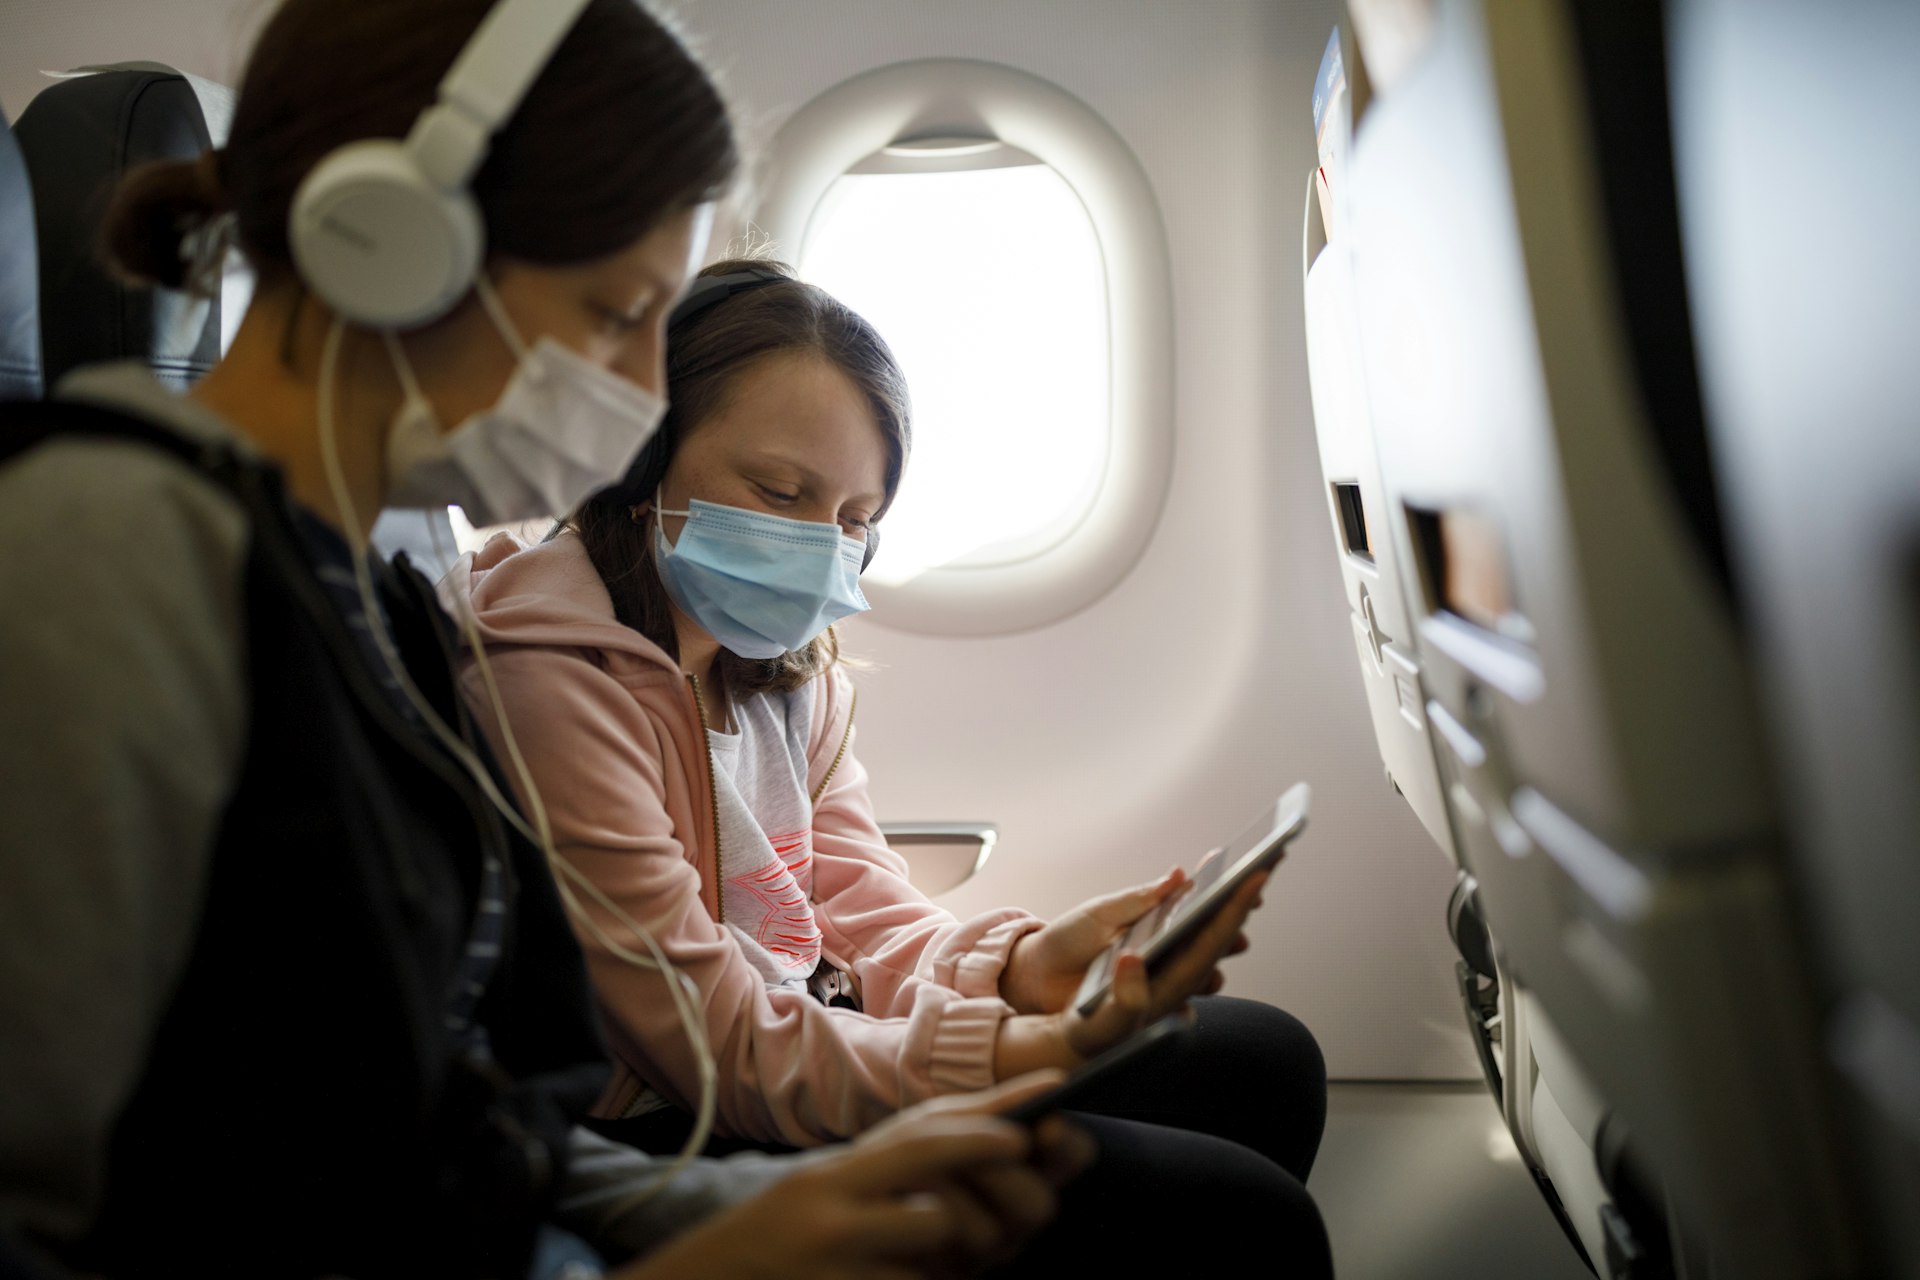 A mother and child wear face masks on an airplane